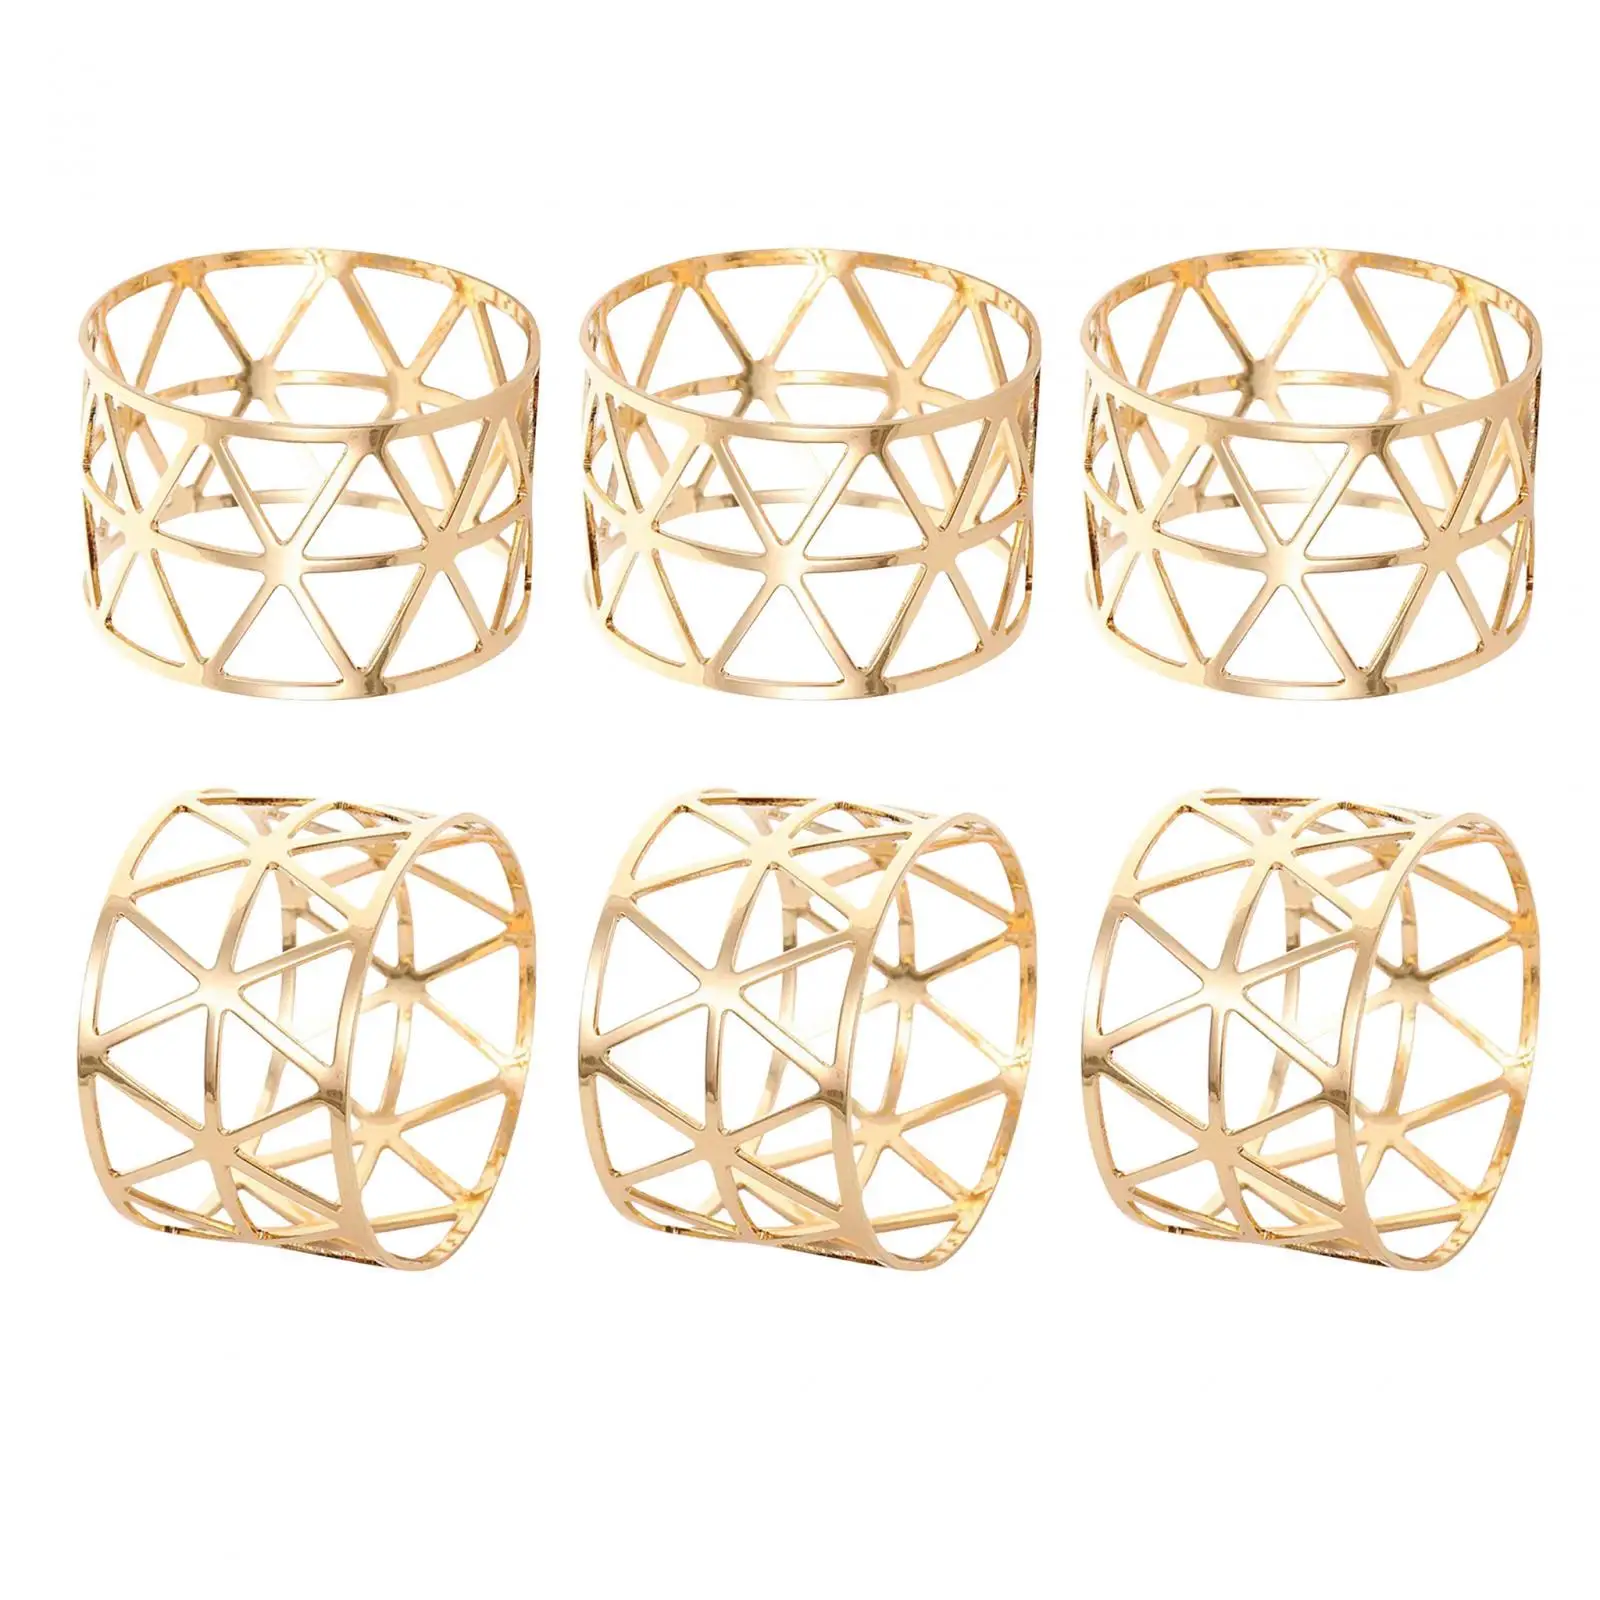 6Pcs Napkin Rings Buckle Ornament Metal Hollow Out Napkin Rings Cloth Napkin Holders for Cafe Banquet Home Wedding Dinner Tables